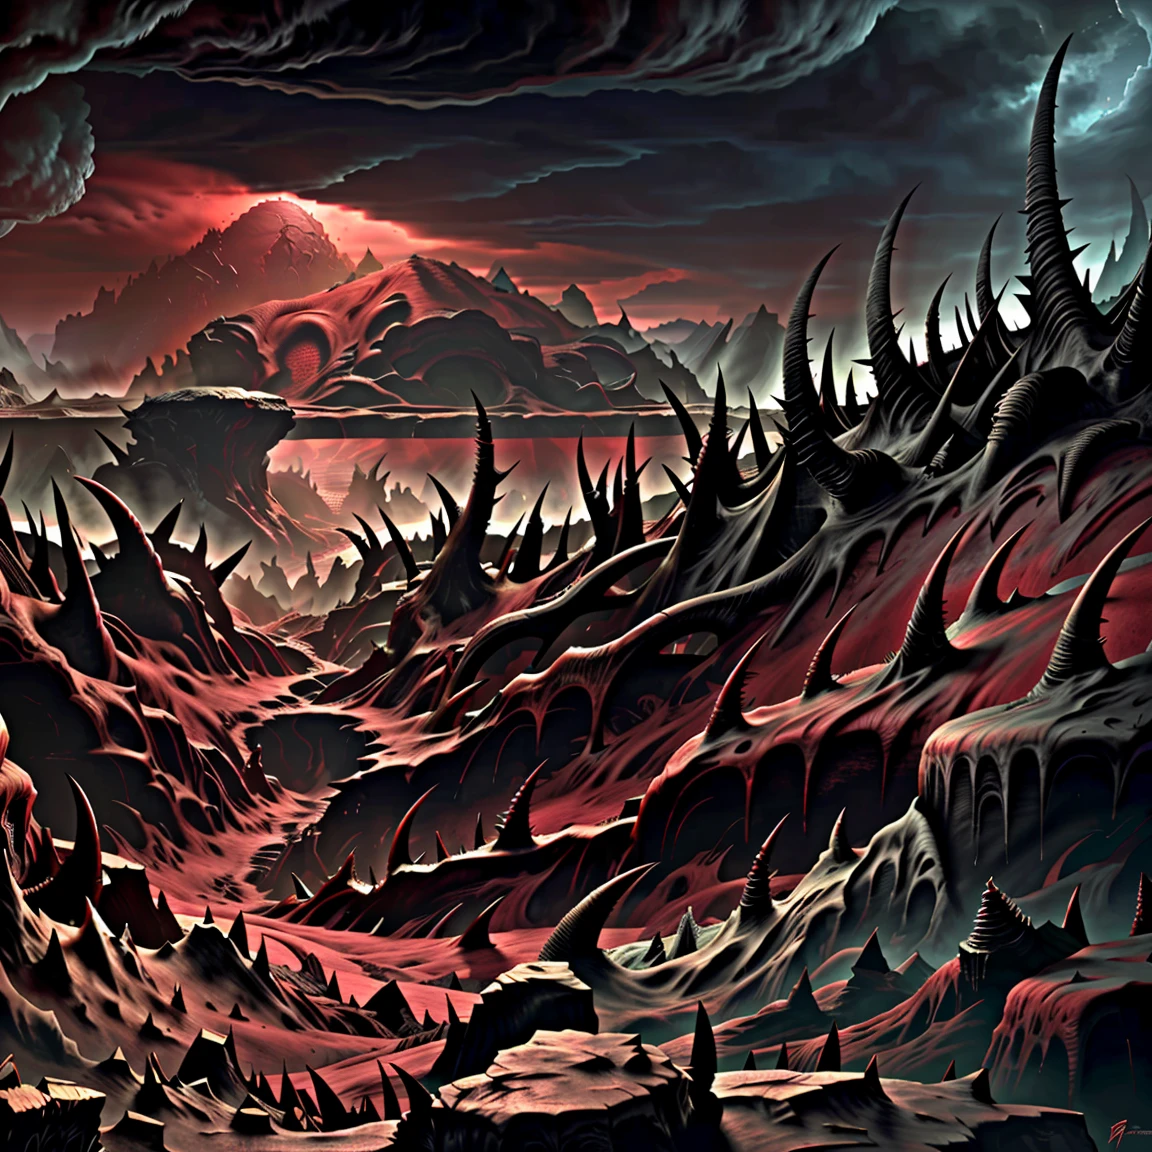 Panoramic view of 7 hell of Dante. Masterpiece illustration, conceptual art, 3d render, blood red sky, landscape of tombs and creepy sculptures, thorns, Spiked walls. Devil sculptures by giger, landscape of horror, digital painting, color drawing. Art by Dan Seagrave.